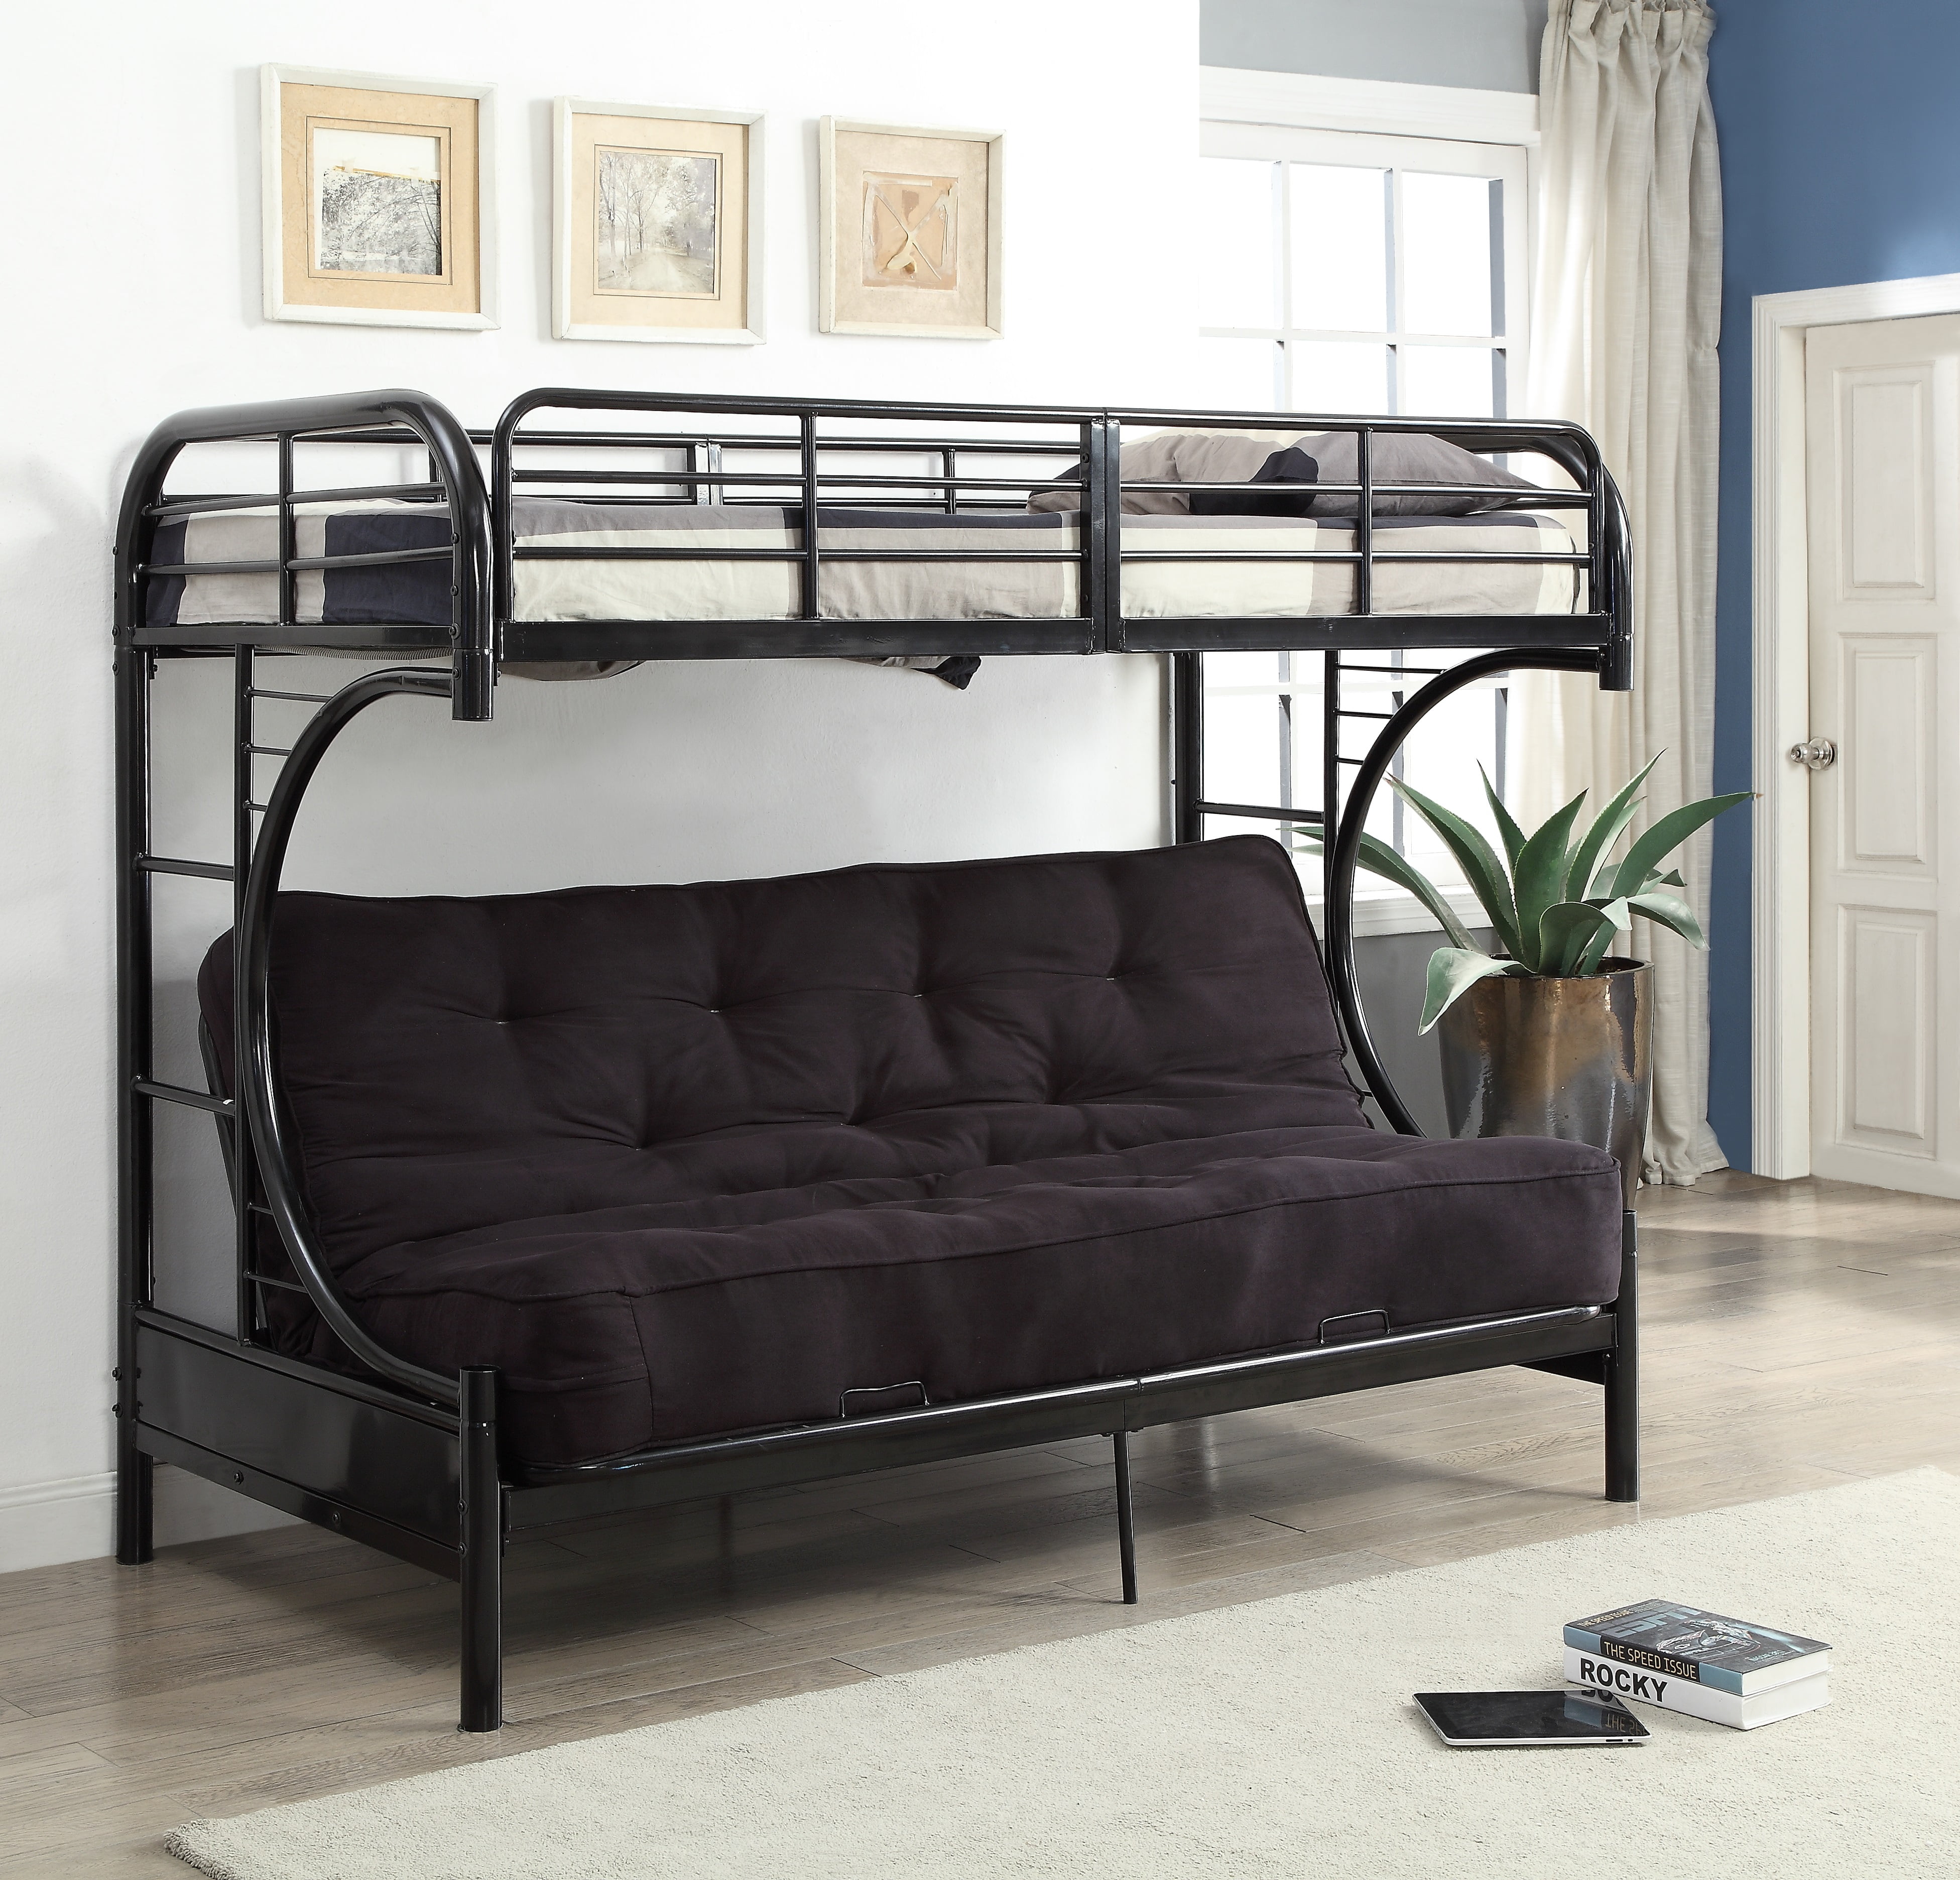 Acme Eclipse Twin Full Futon Bunk Bed, Acme Eclipse Bunk Bed Parts